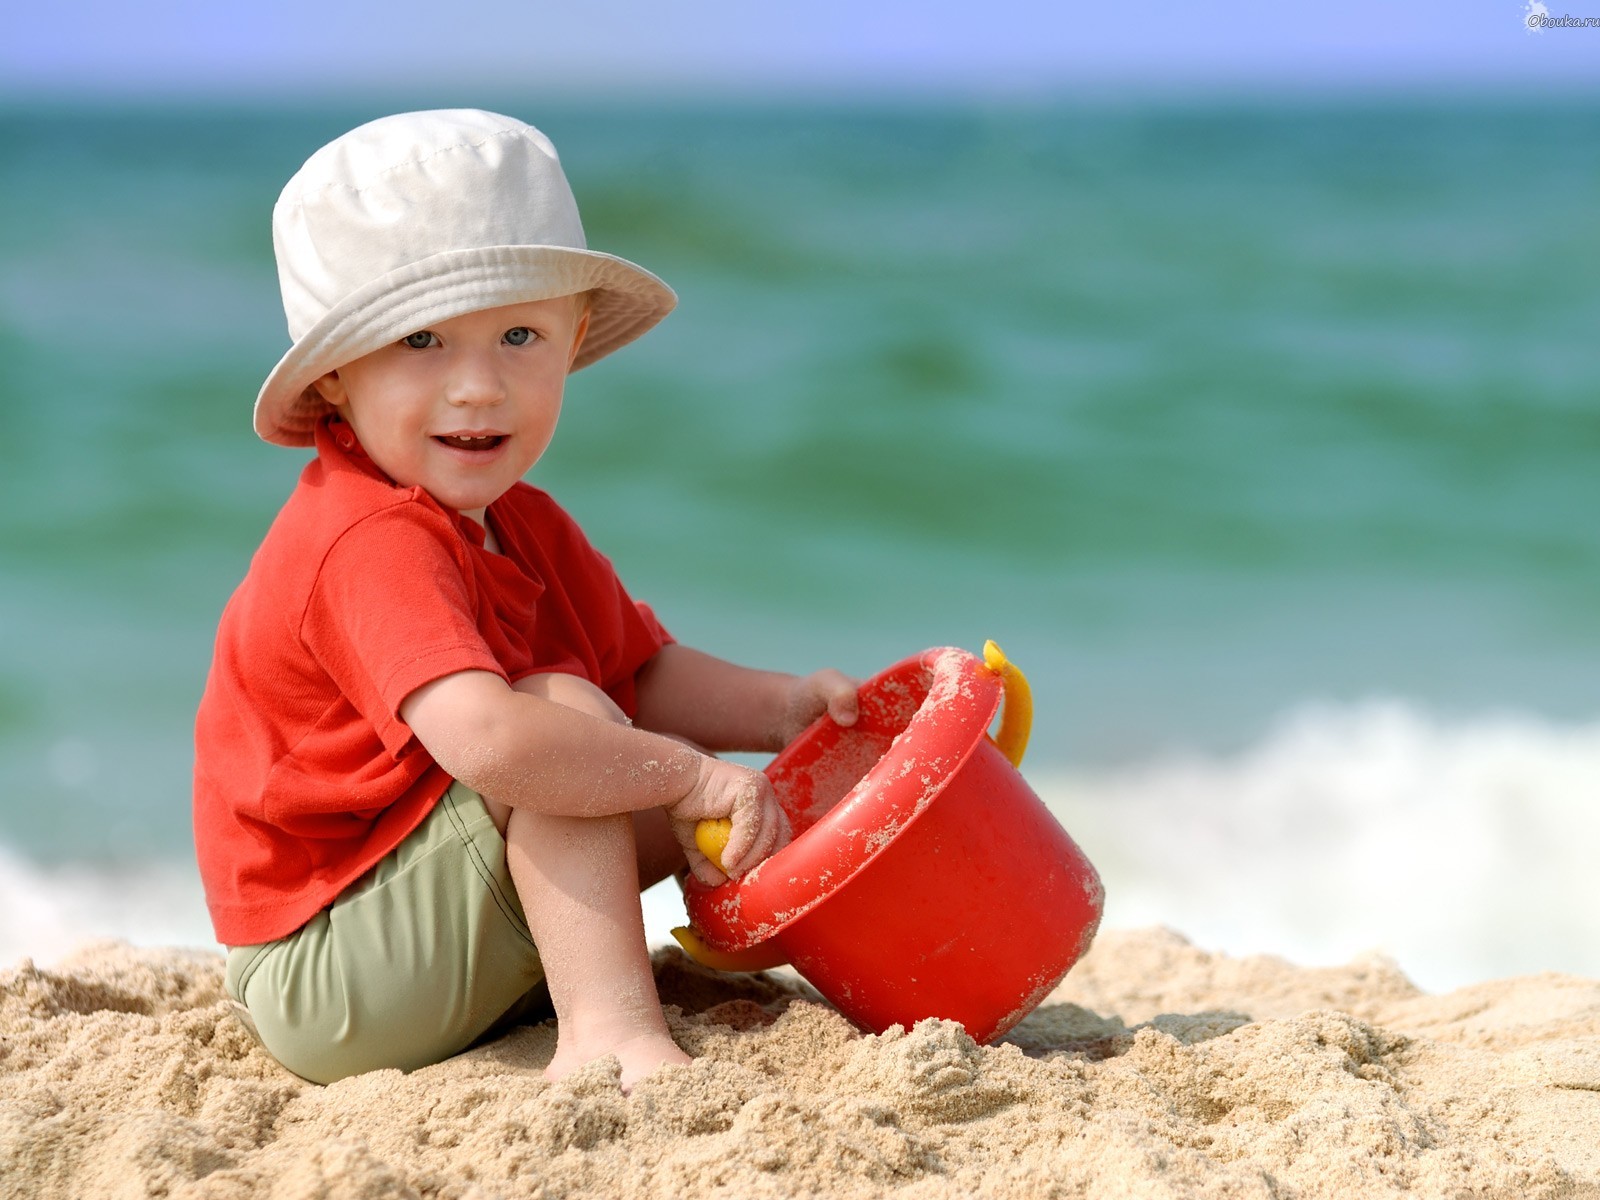 Baby Boy Playing On Beach Sand Wallpapers 1600x1200 305921